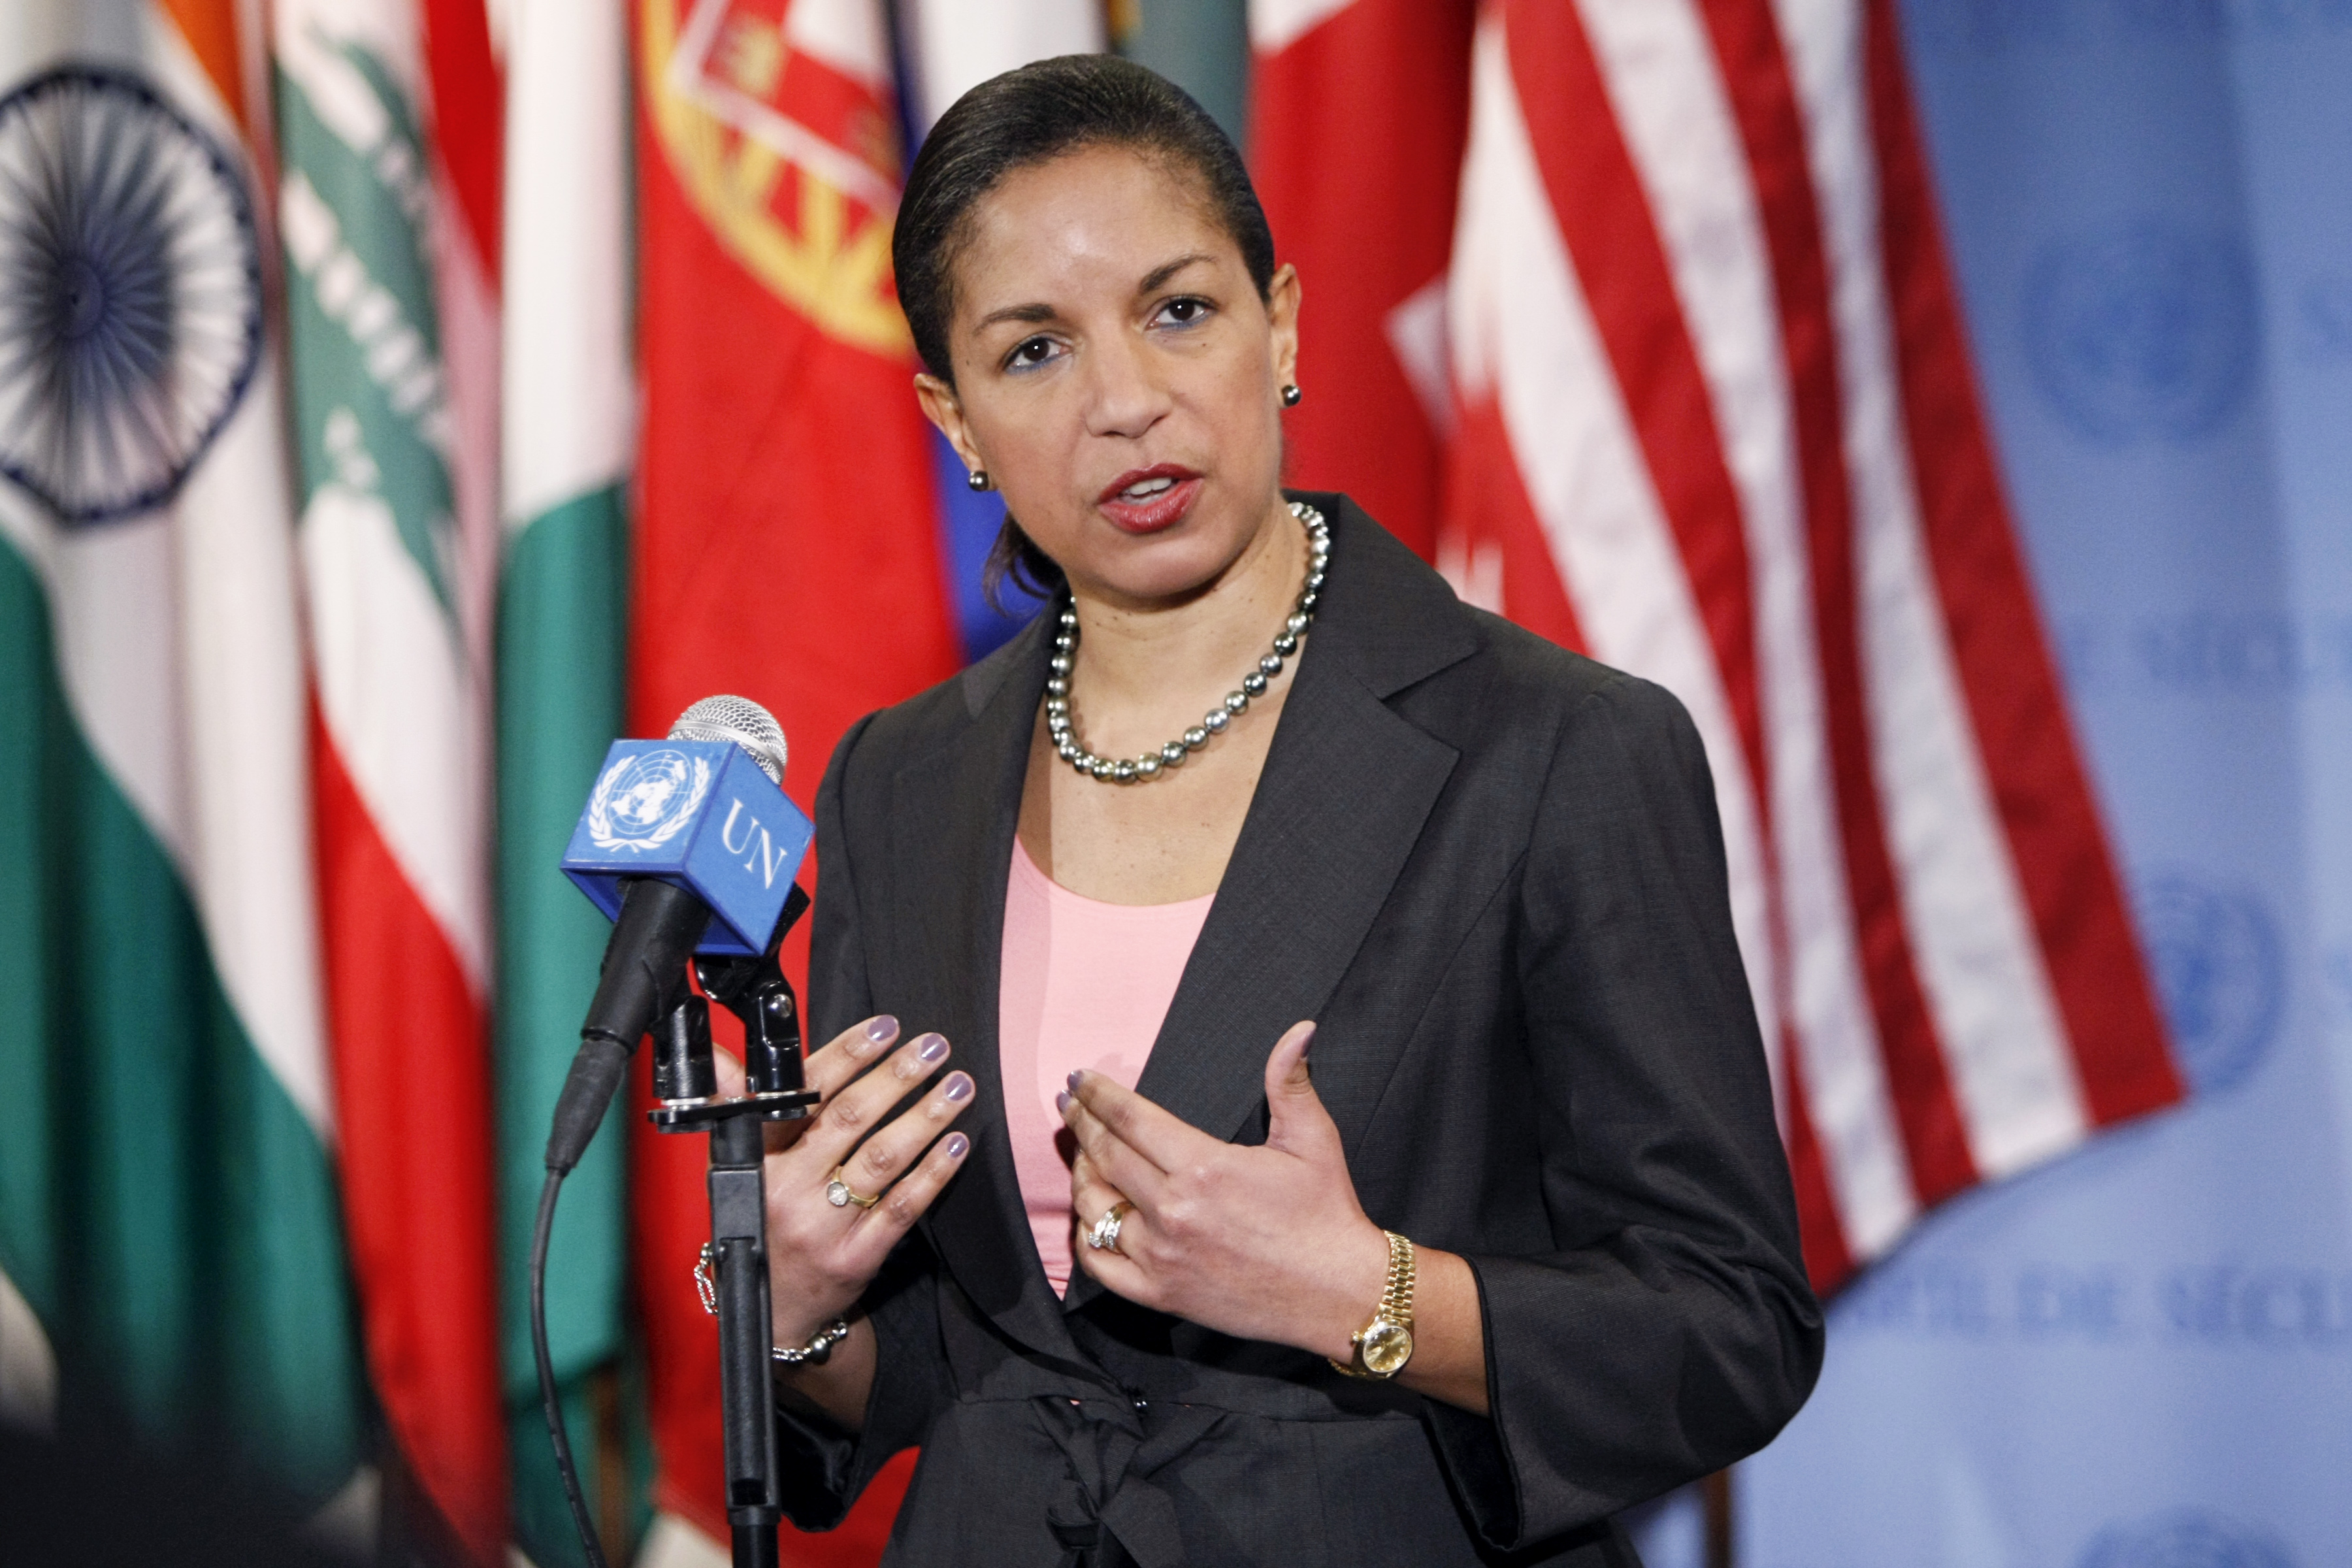 Susan Rice: U.S. Permanent Representative to the United Nations